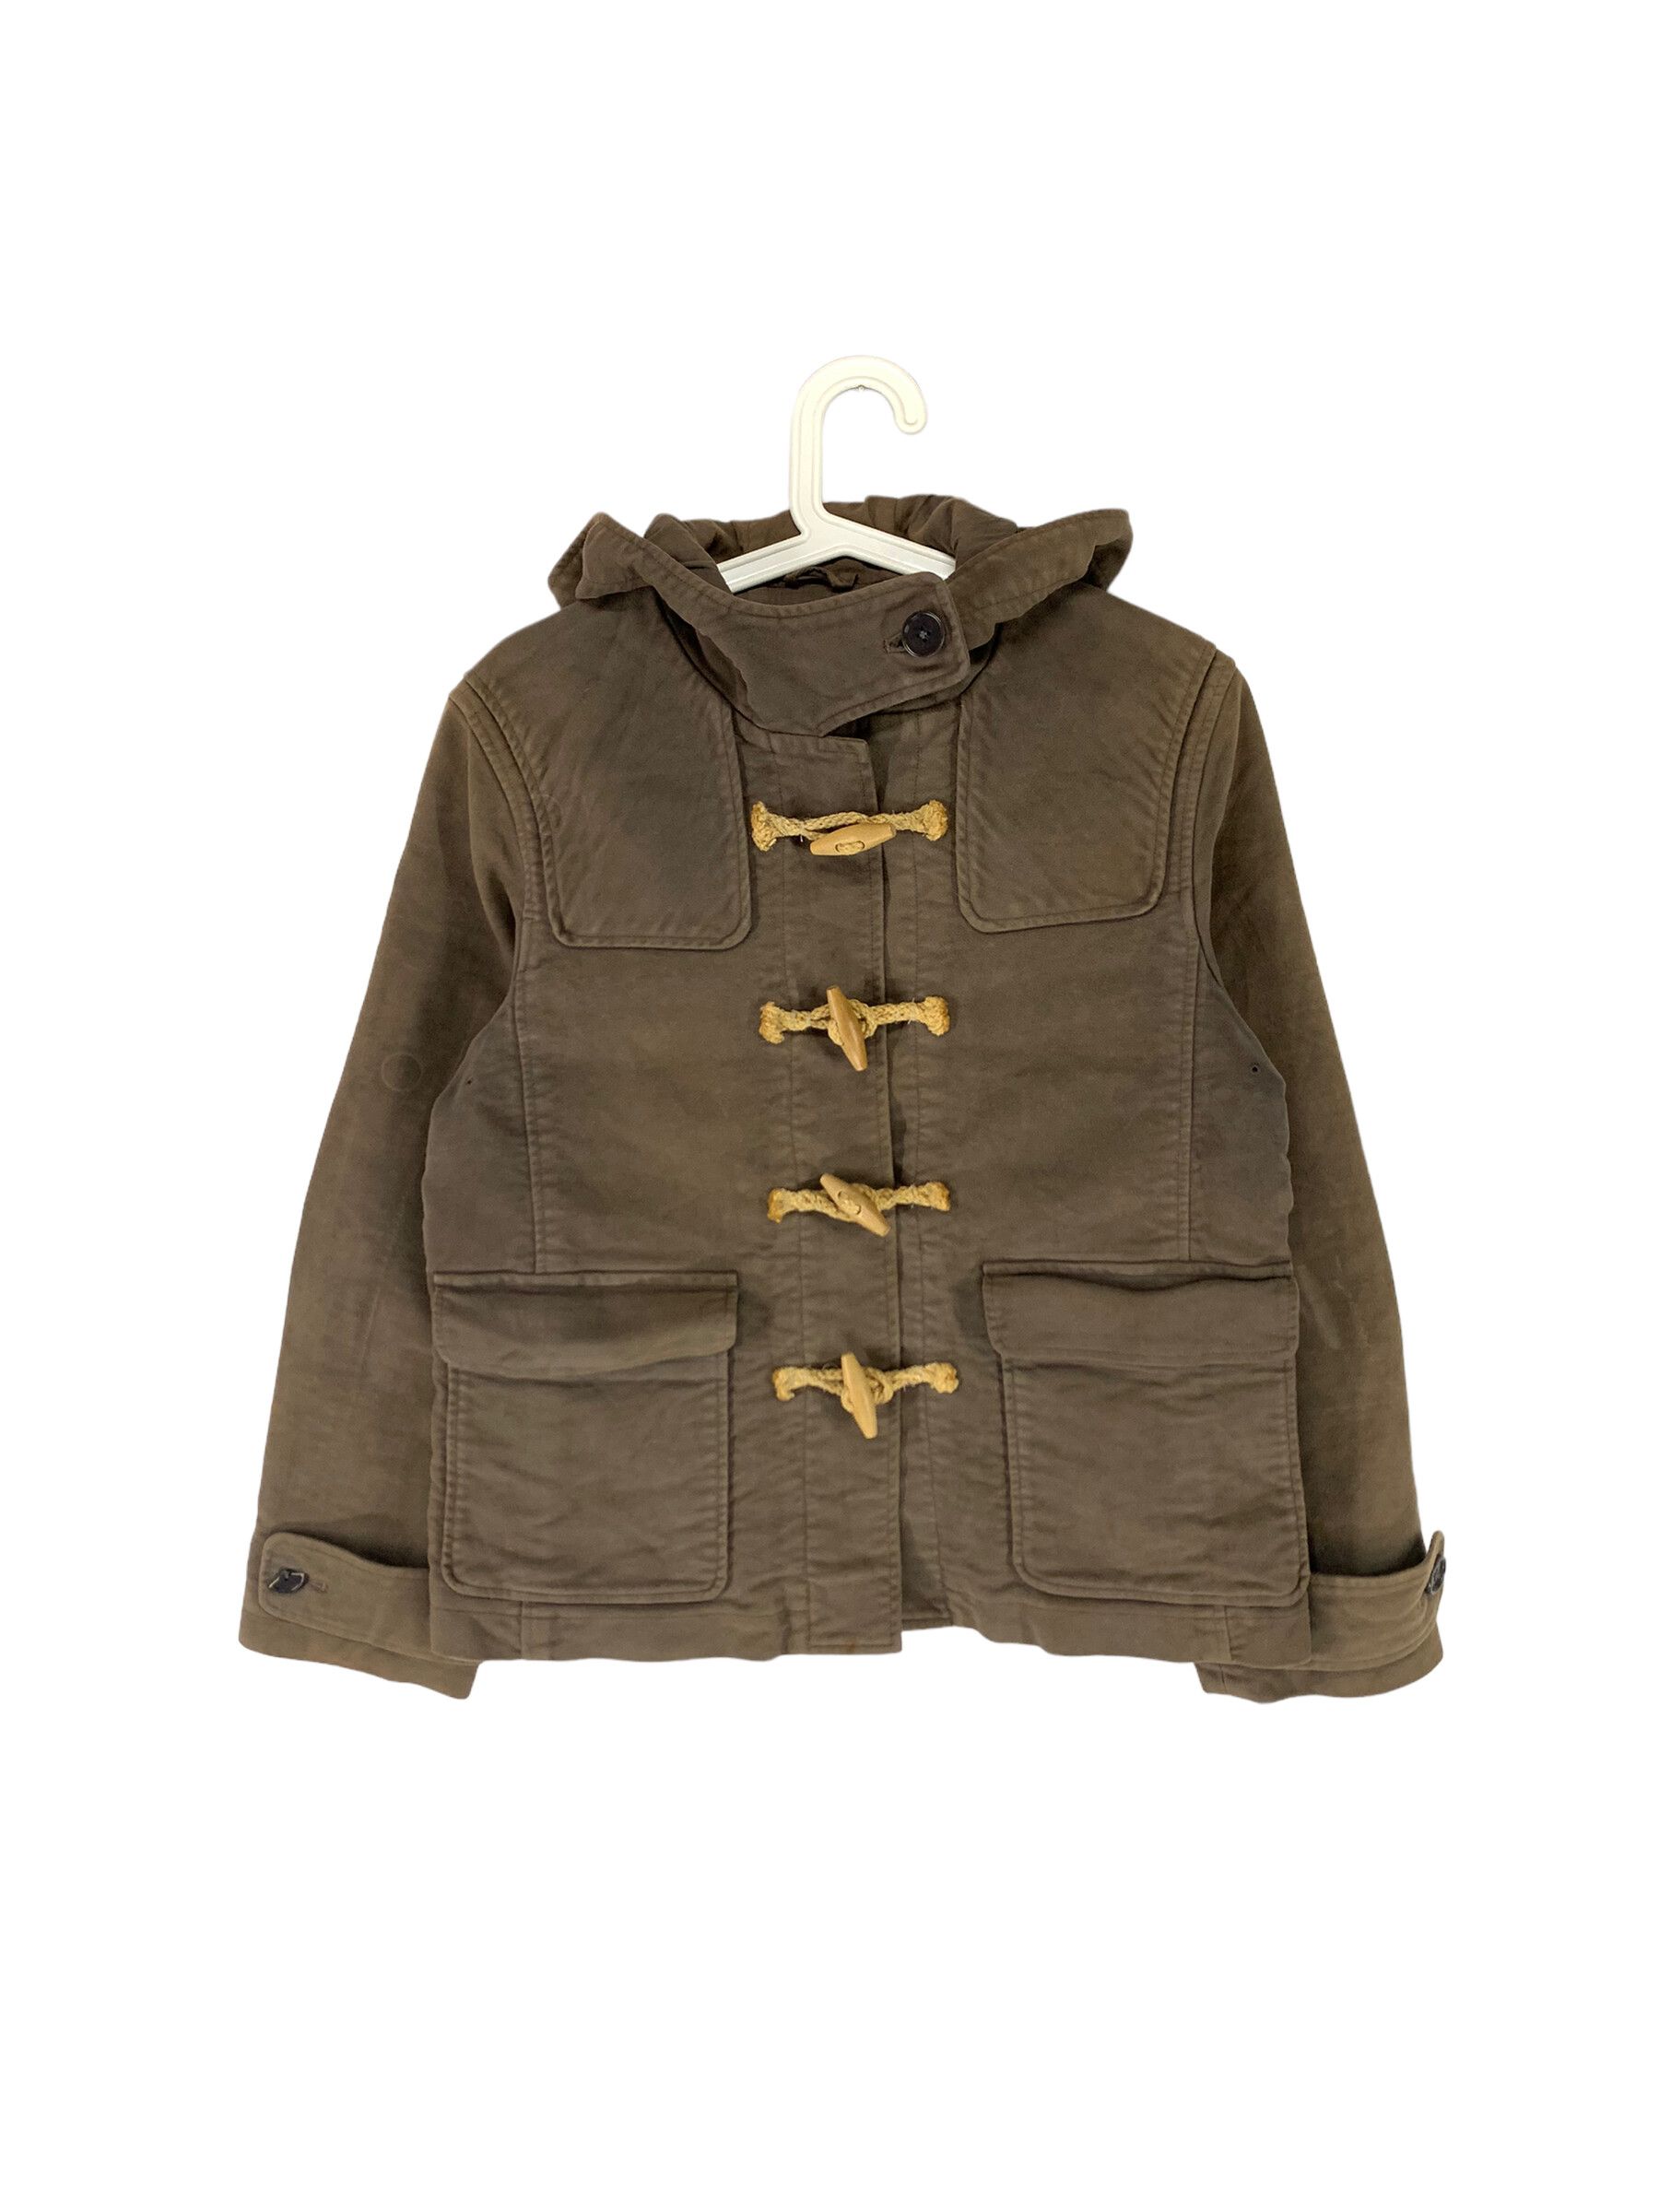 Margaret Howell Margaret Howell toggle button thick jacket | Grailed